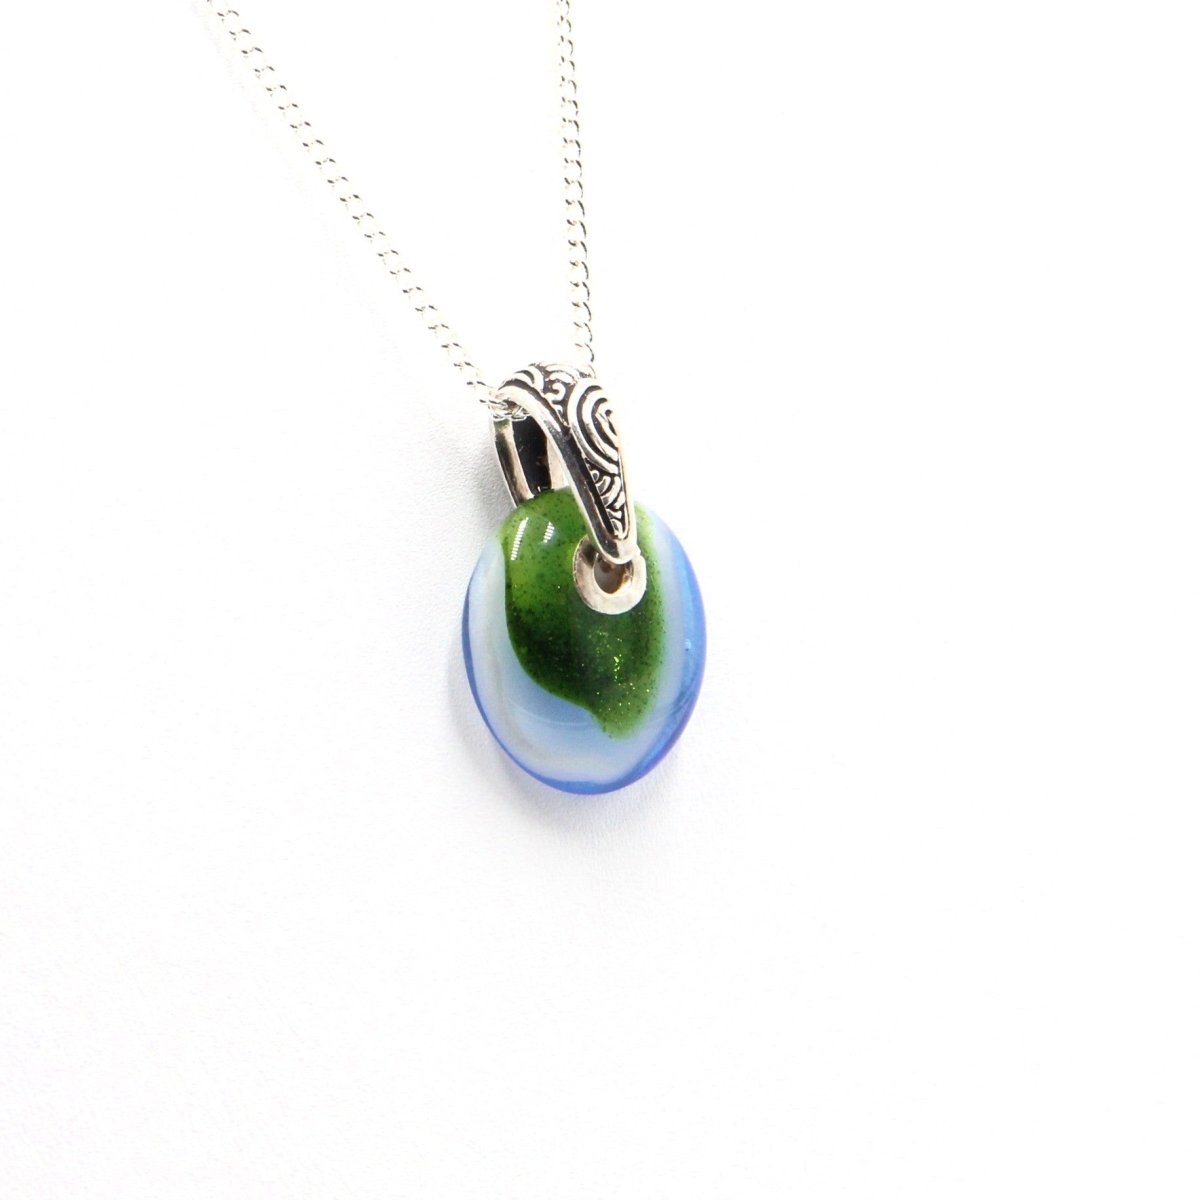 Small Blue and Green Glass Pendant with Silver Accents